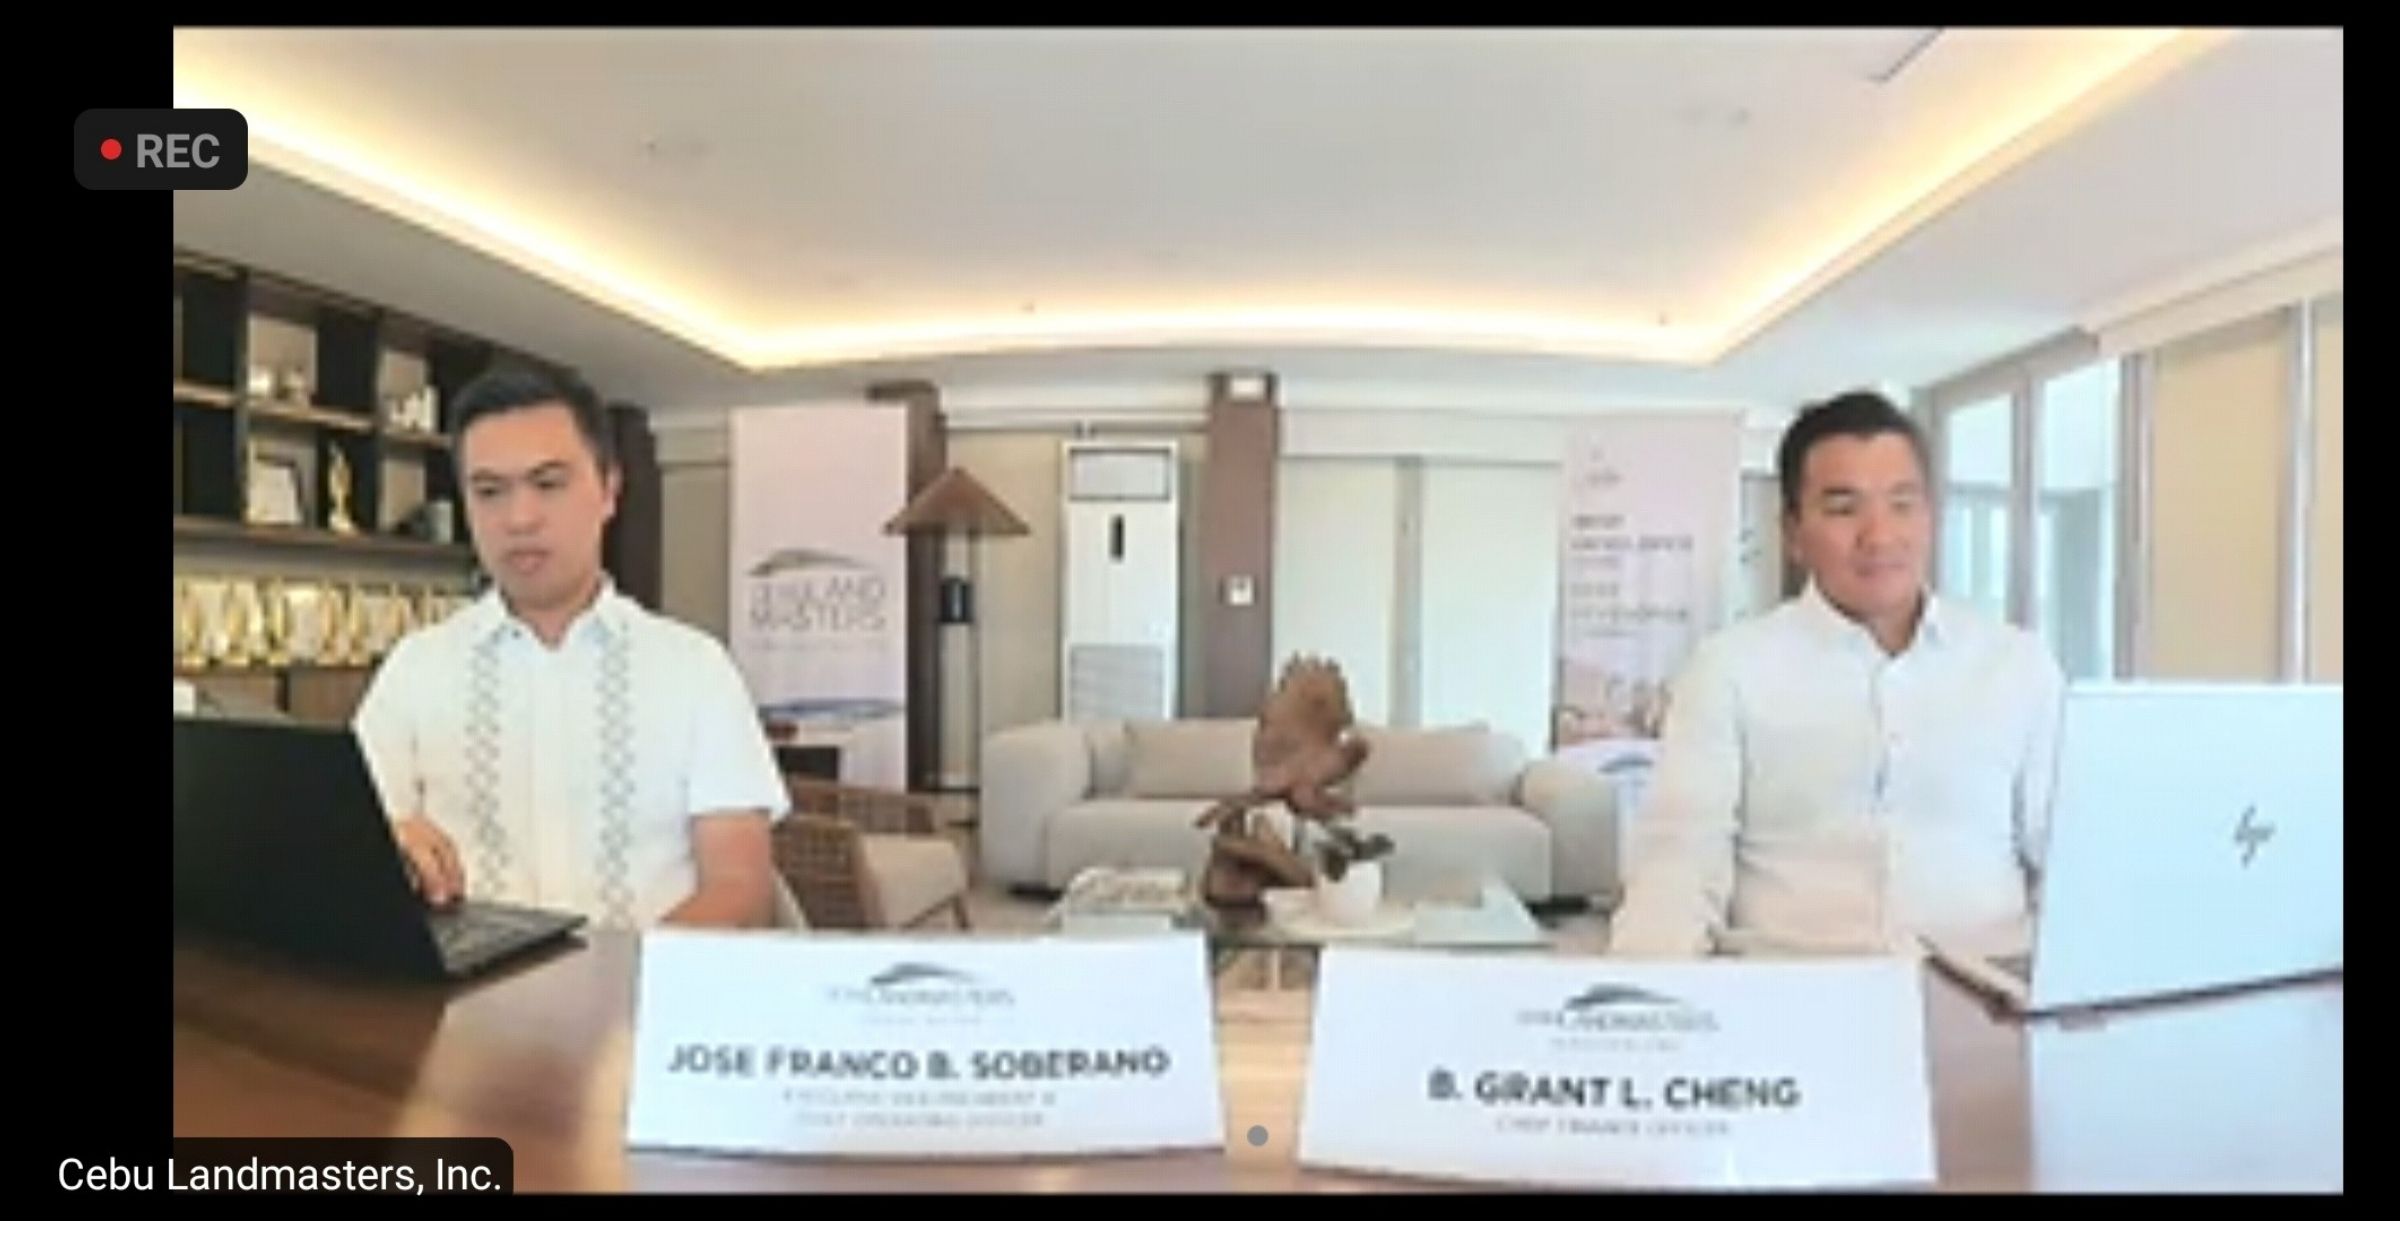 Cebu Landmasters Inc. Executive Vice President and Chief Operating Officer Jose Franco Soberano and Chief Finance Officer Grant Cheng brief stockholders and media on the company’s 1st quarter performance.